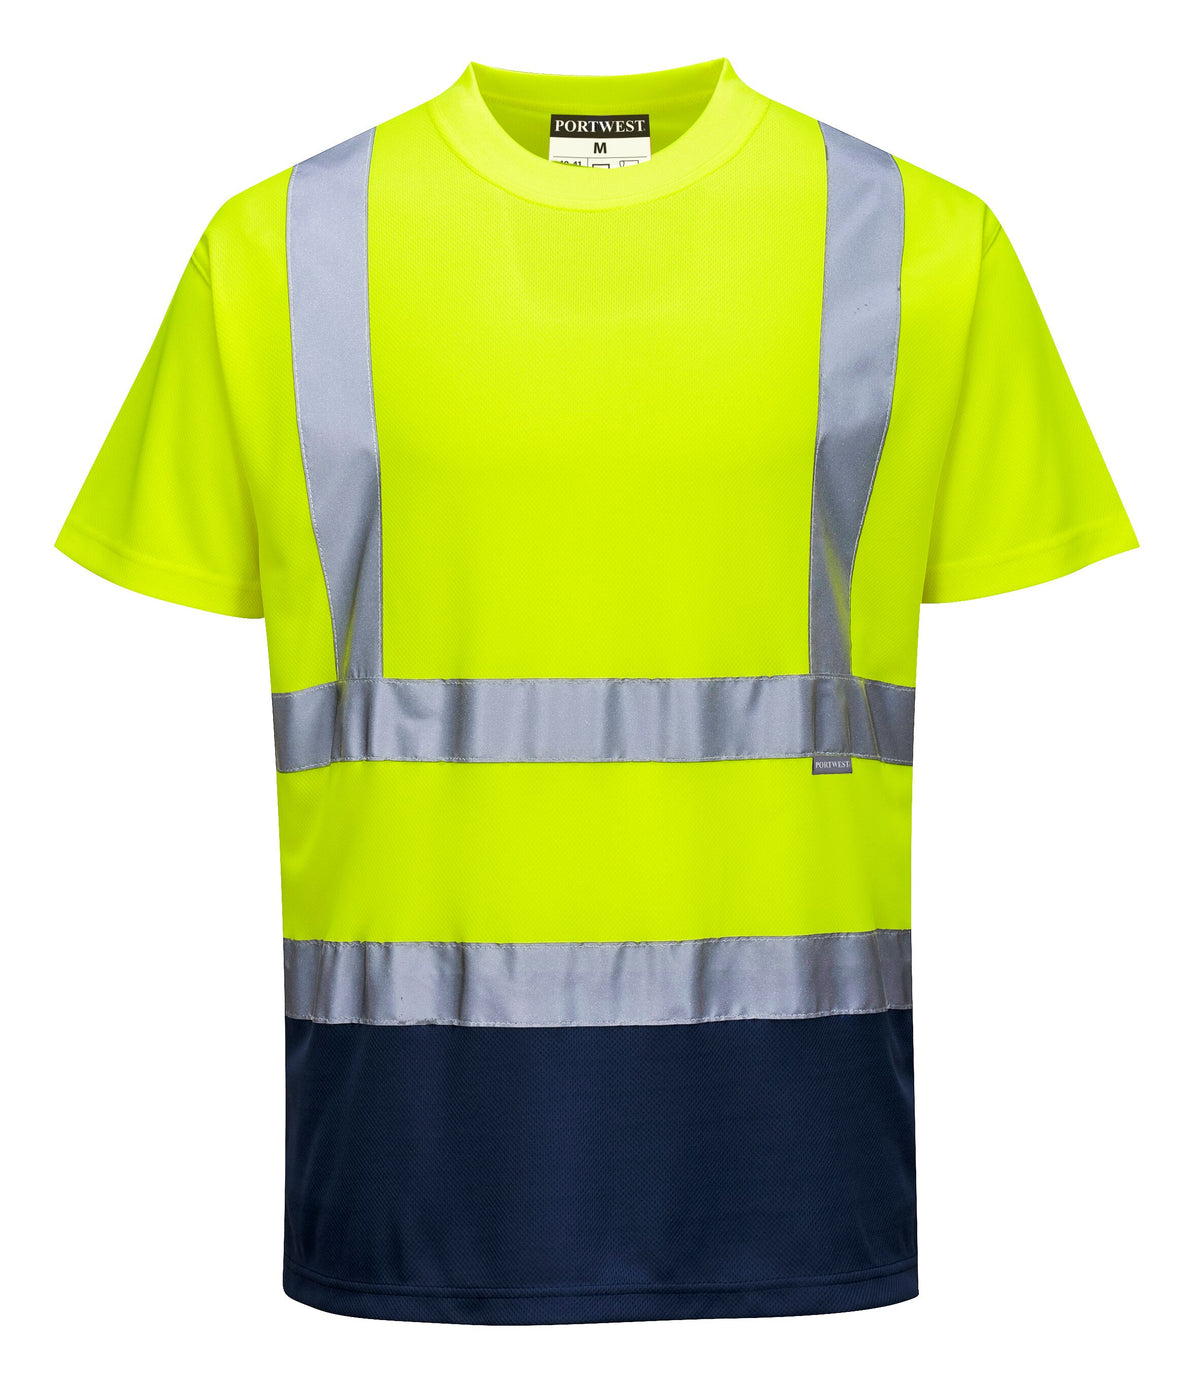 Two Tone High Visibility Shirts -  Reflective Shirt for Men and Women Hi Vis Work Clothes